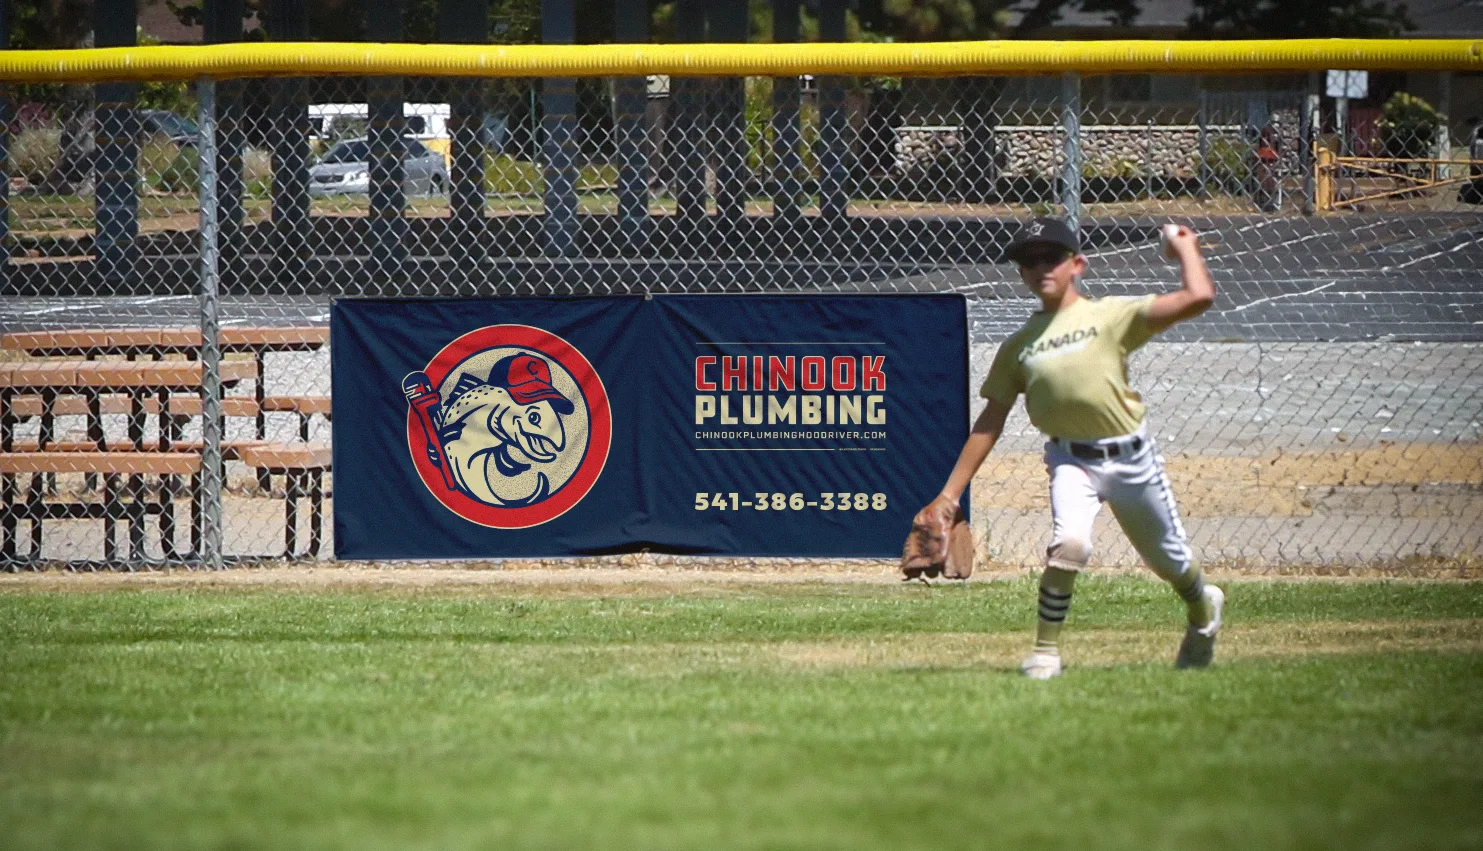 Chinook Plumbing sponsor banner depicting the new branding hanging on outfield fence